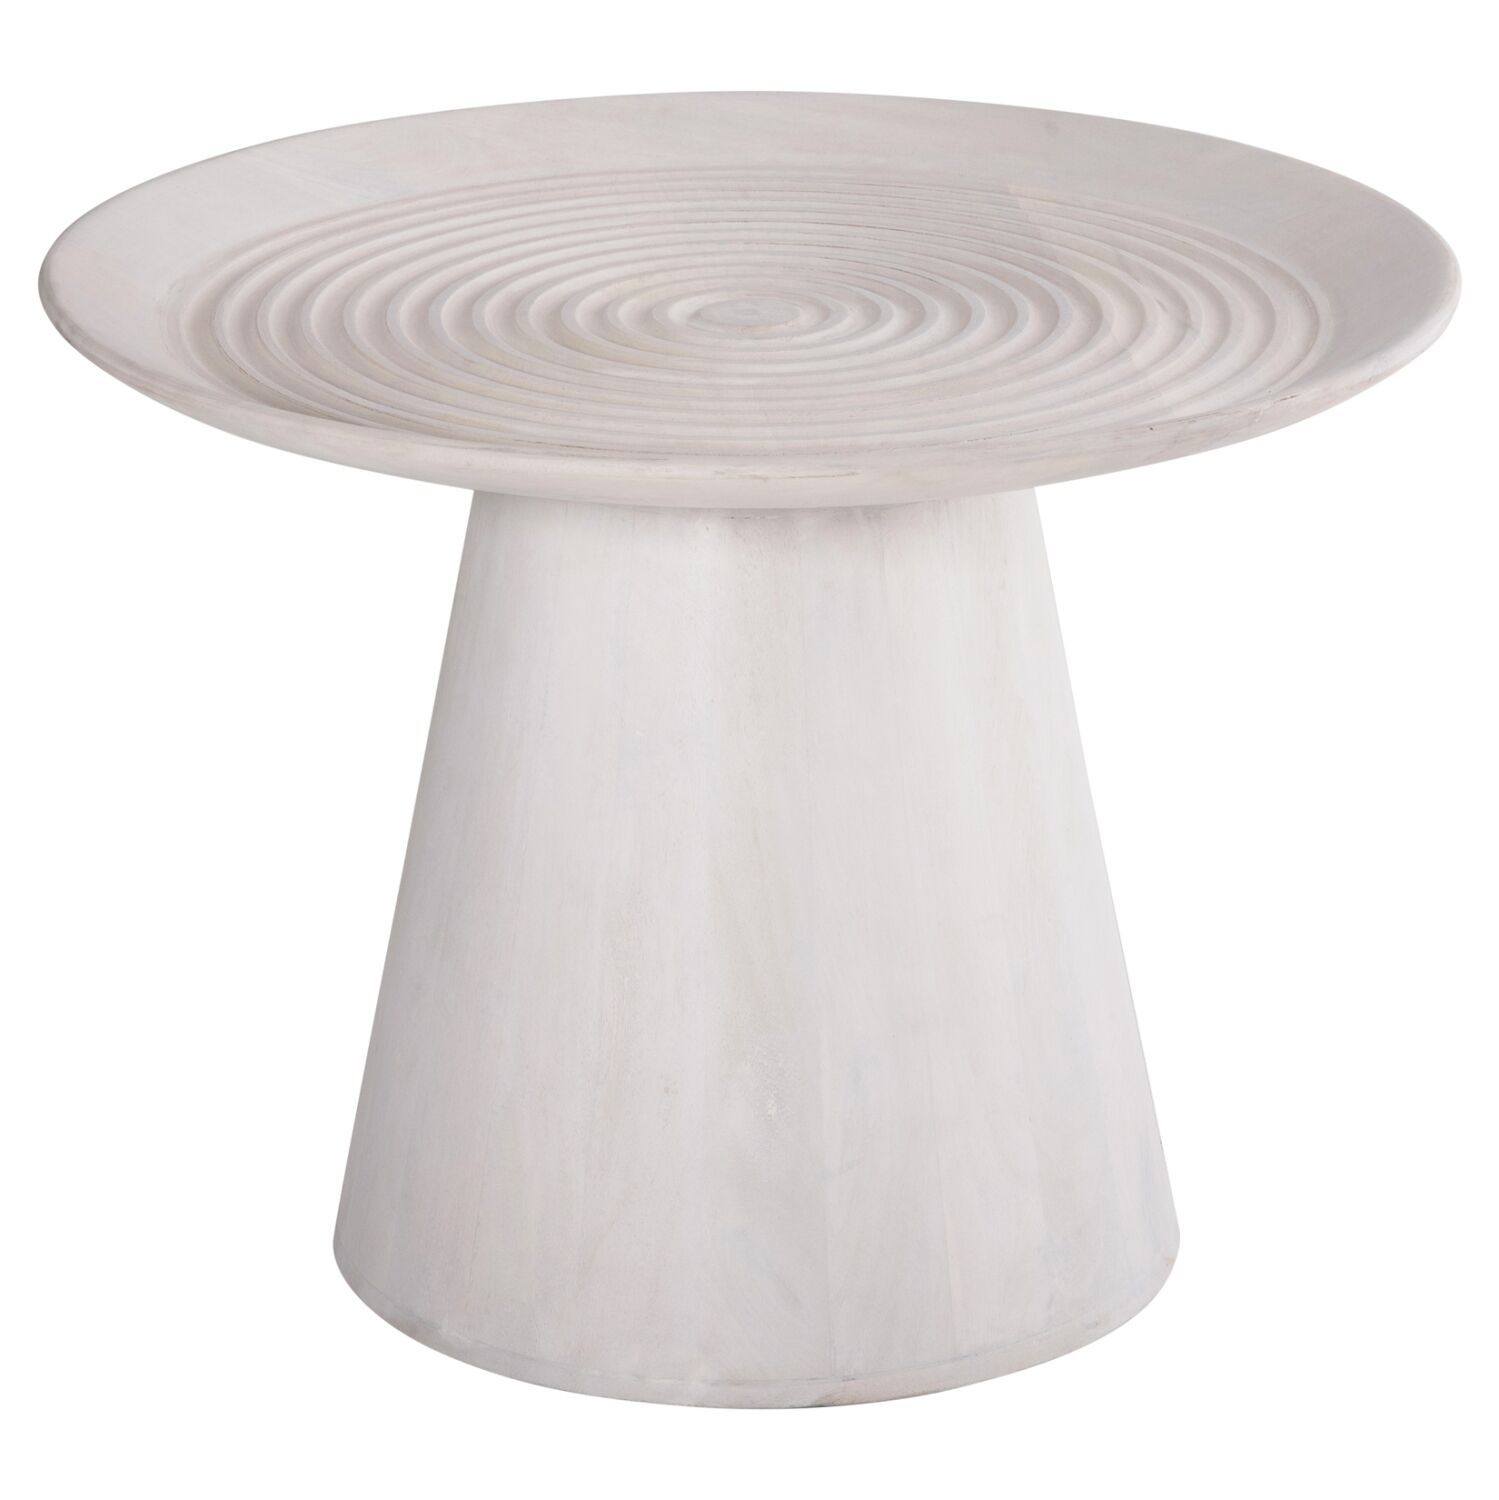 SIDE TABLE ROUND ROSS HM9708 SOLID MANGO WOOD IN WHITE Φ45x48Hcm.